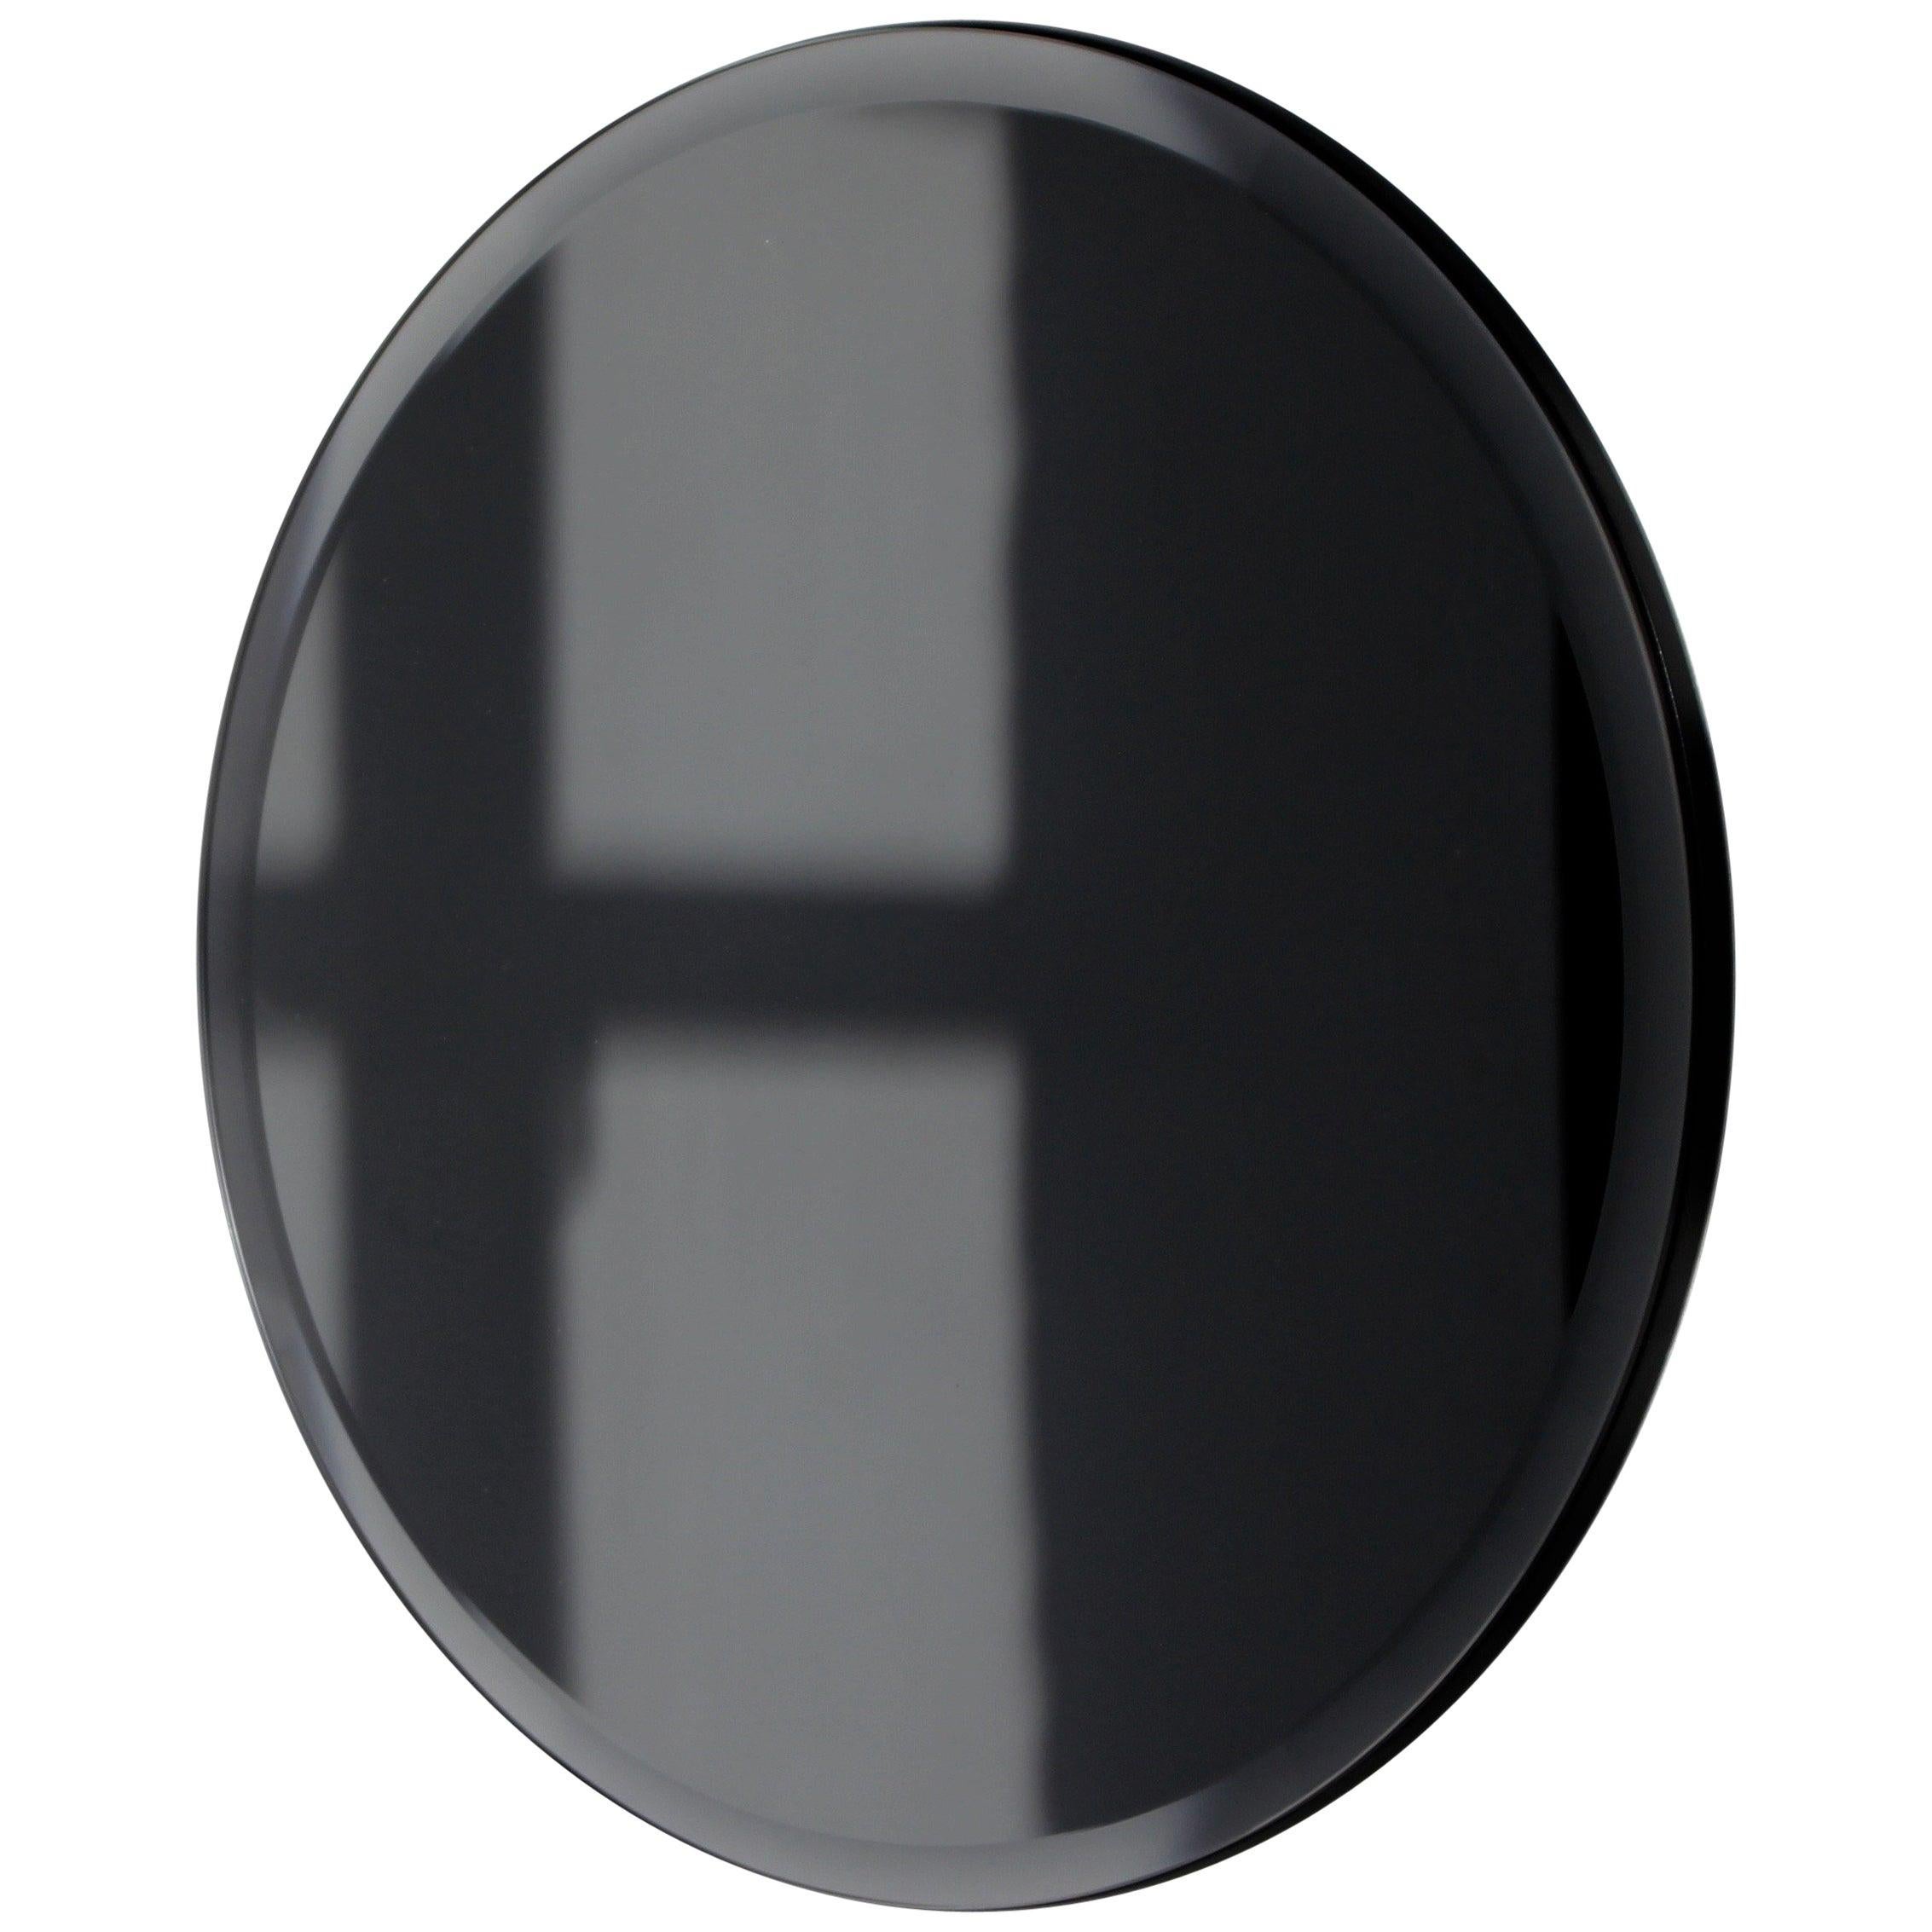 Orbis Bevelled Black Tinted Round Frameless Mirror Faux Leather Backing, Medium